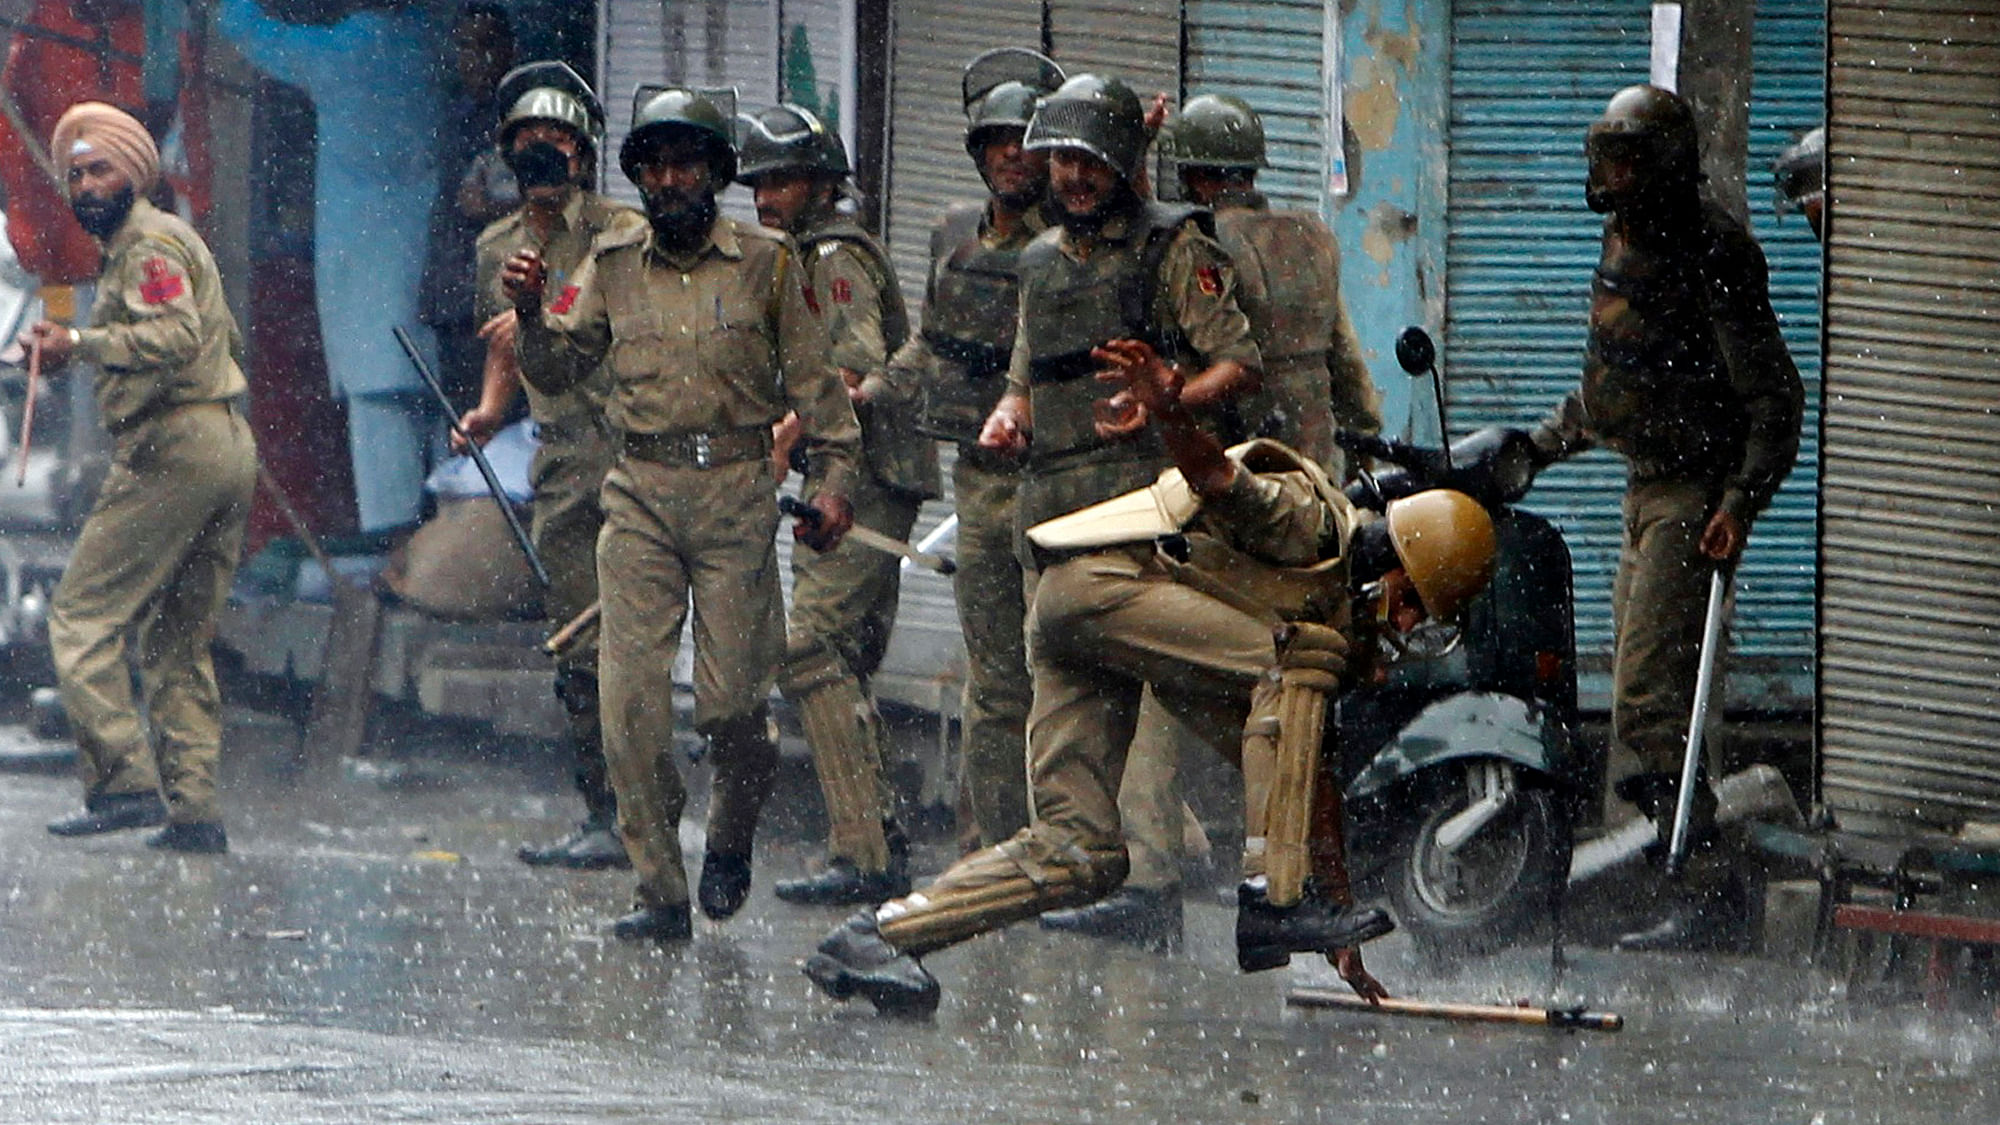 A policeman falls after throwing a piece of stone towards protesters in Srinagar. (Photo: Reuters)